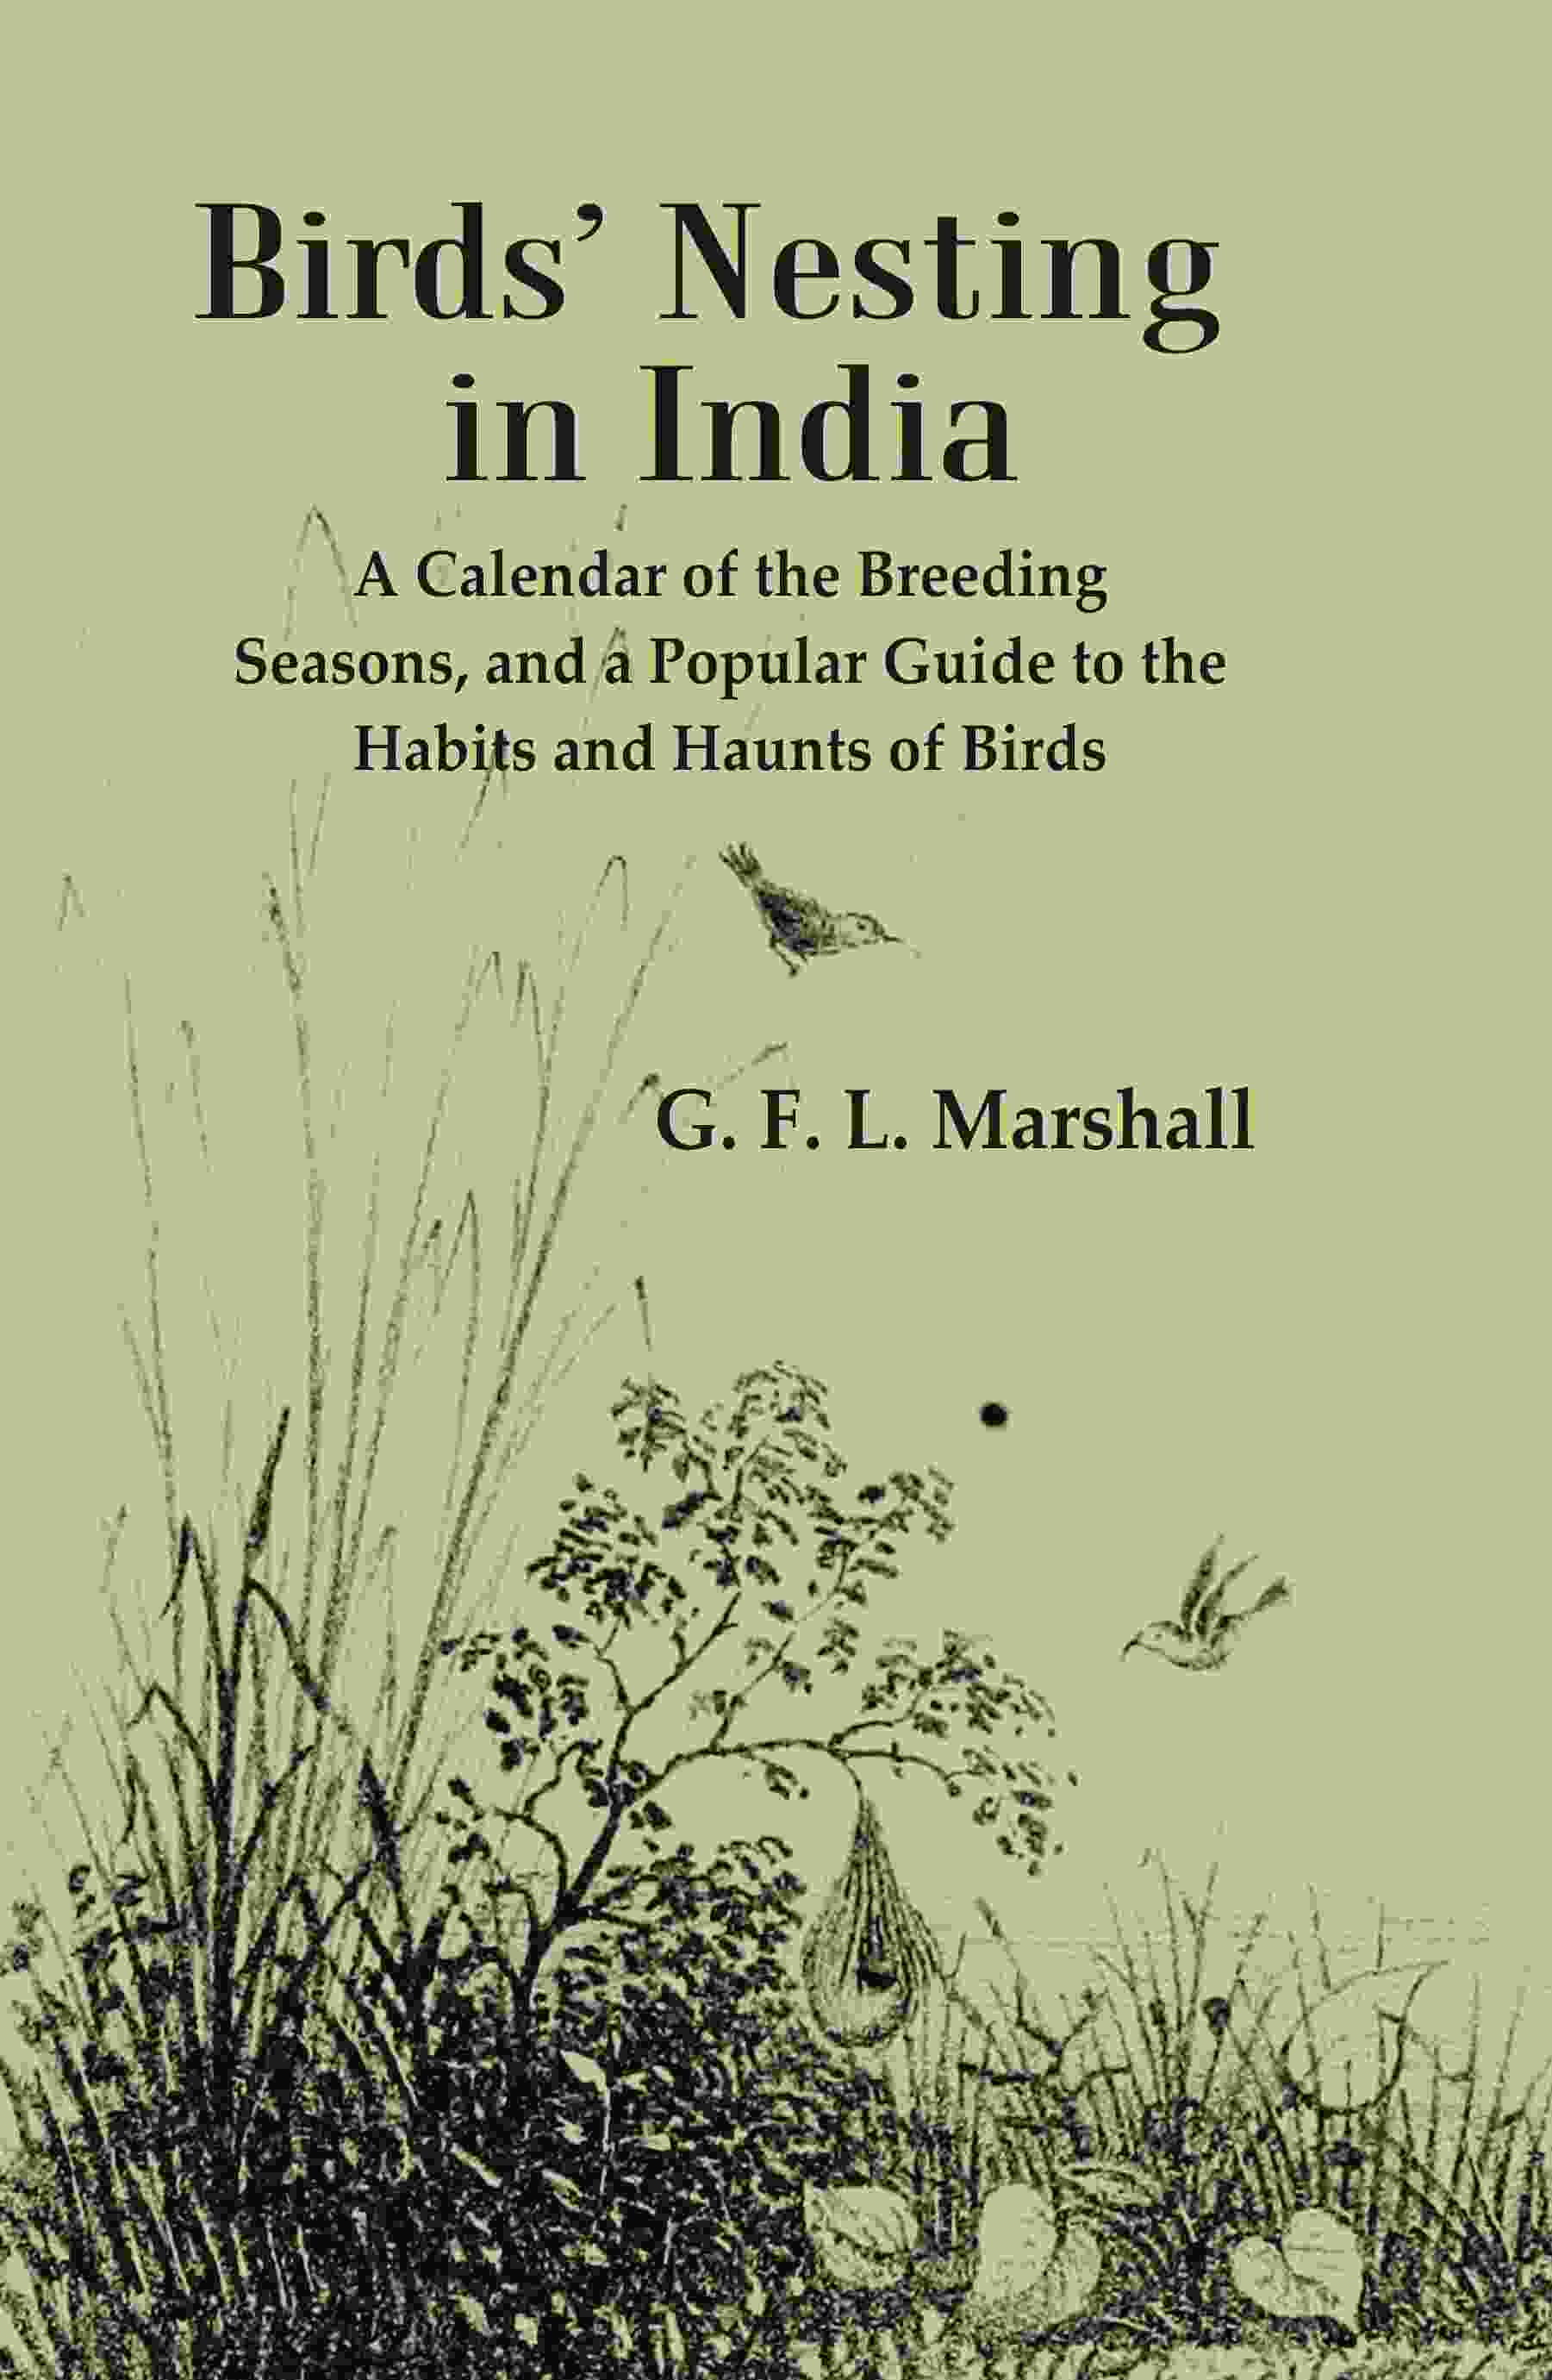 Birds’ Nesting in India: A Calendar of the Breeding Seasons, and a Popular Guide to the Habits and Haunts of Birds